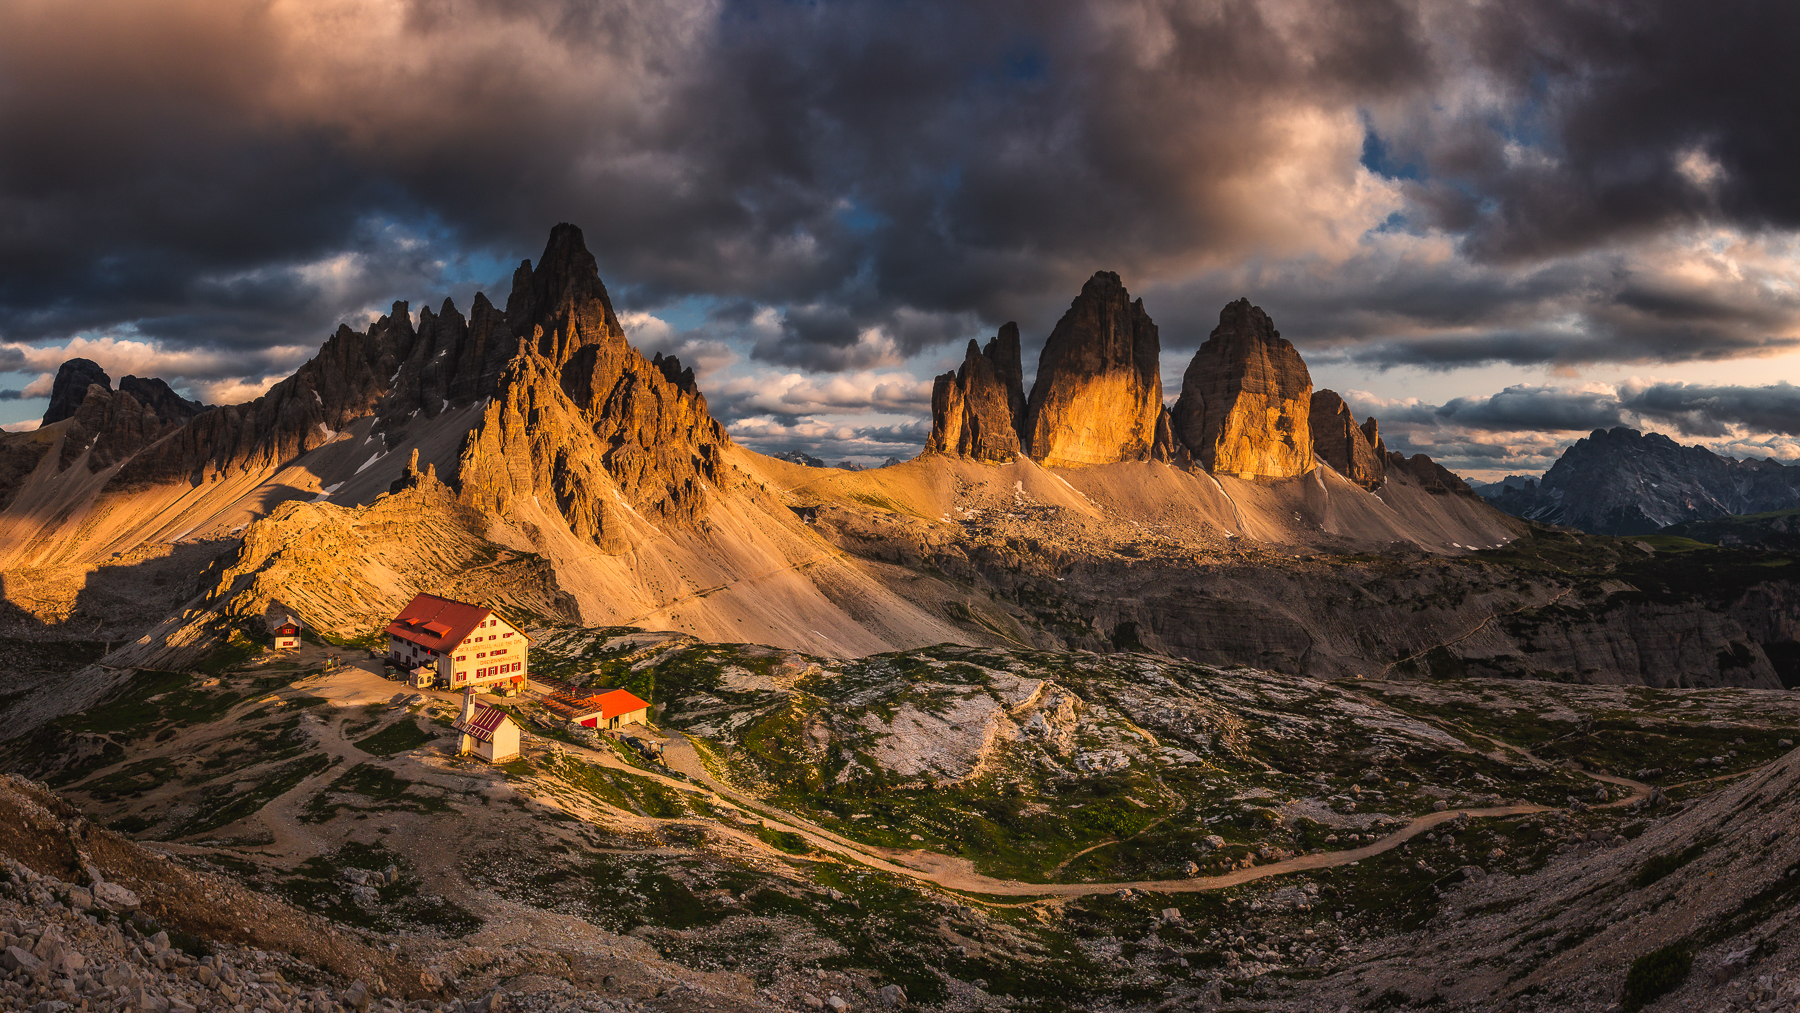 General 1800x1013 landscape nature Dolomites Italy mountains rocks clouds road sunlight